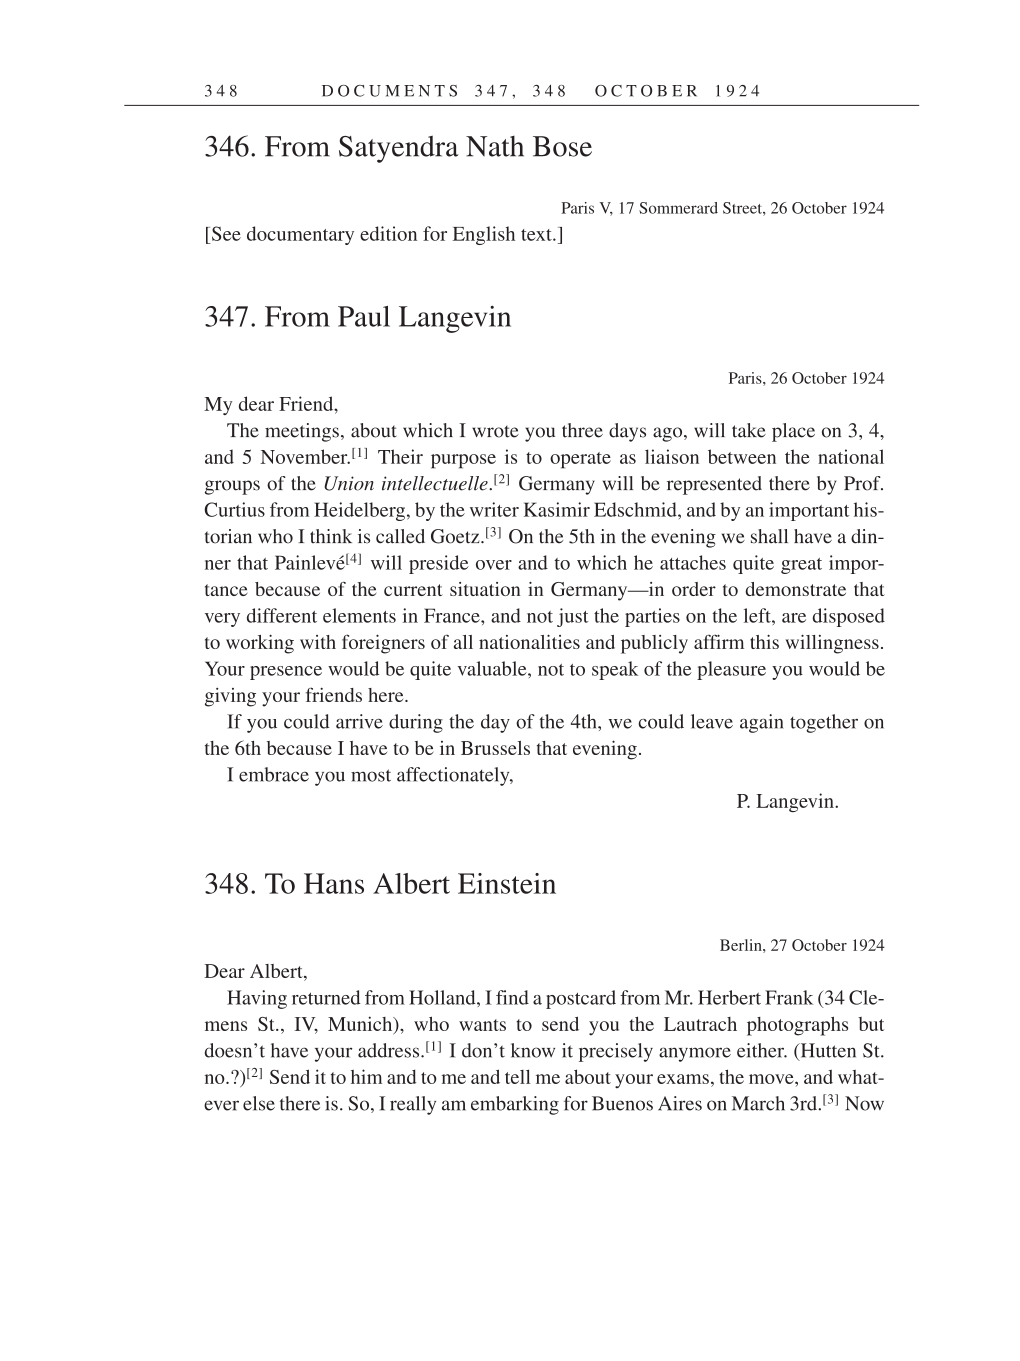 Volume 14: The Berlin Years: Writings & Correspondence, April 1923-May 1925 (English Translation Supplement) page 348